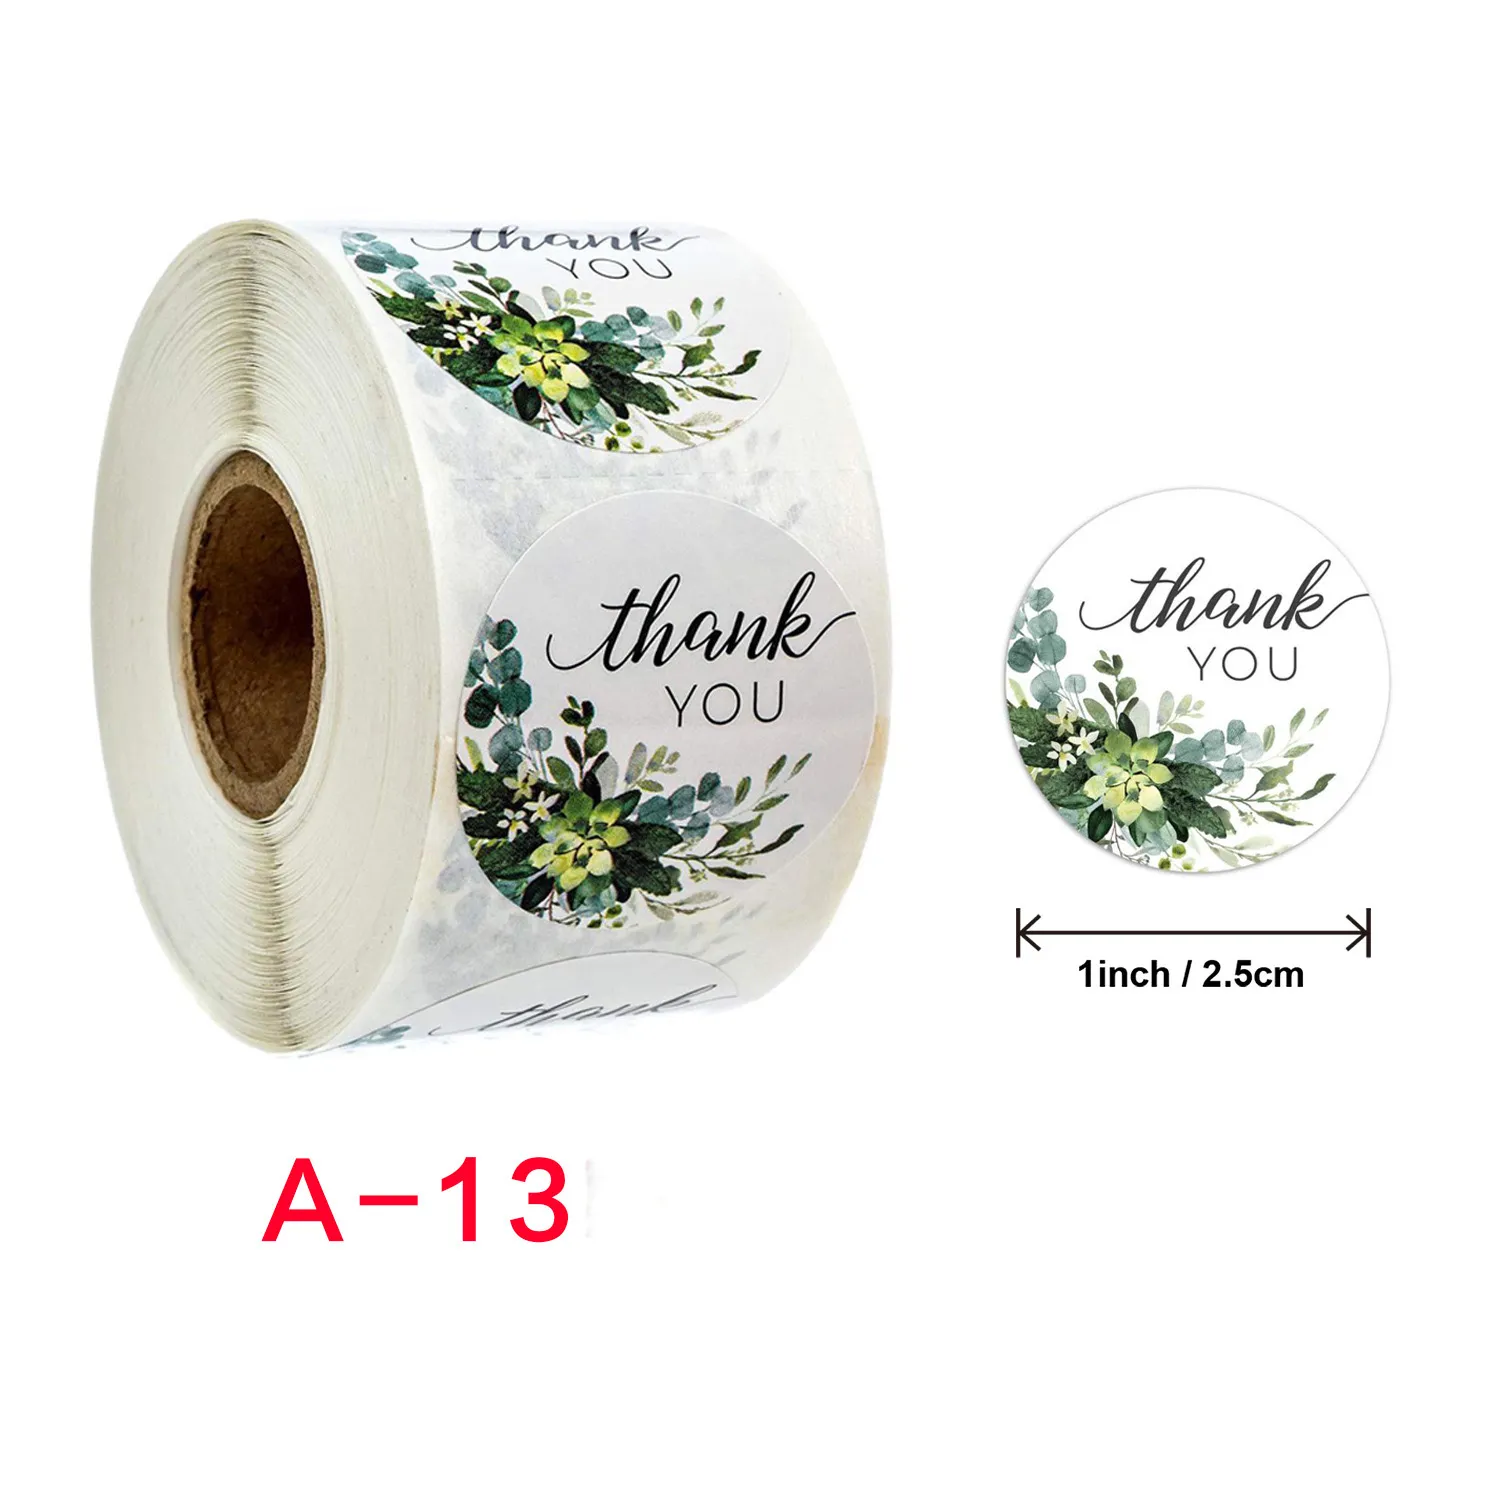 500 Thank You Round Circle Sticker Labels For Scrapbooking, Envelopes,  Gifts, Flowers, And Weddings 1 Inch 2.5cm Greenery And Stationery Labels  Perfect For Bridal Showers And Gifts From Uniquebridalboutique, $6.04